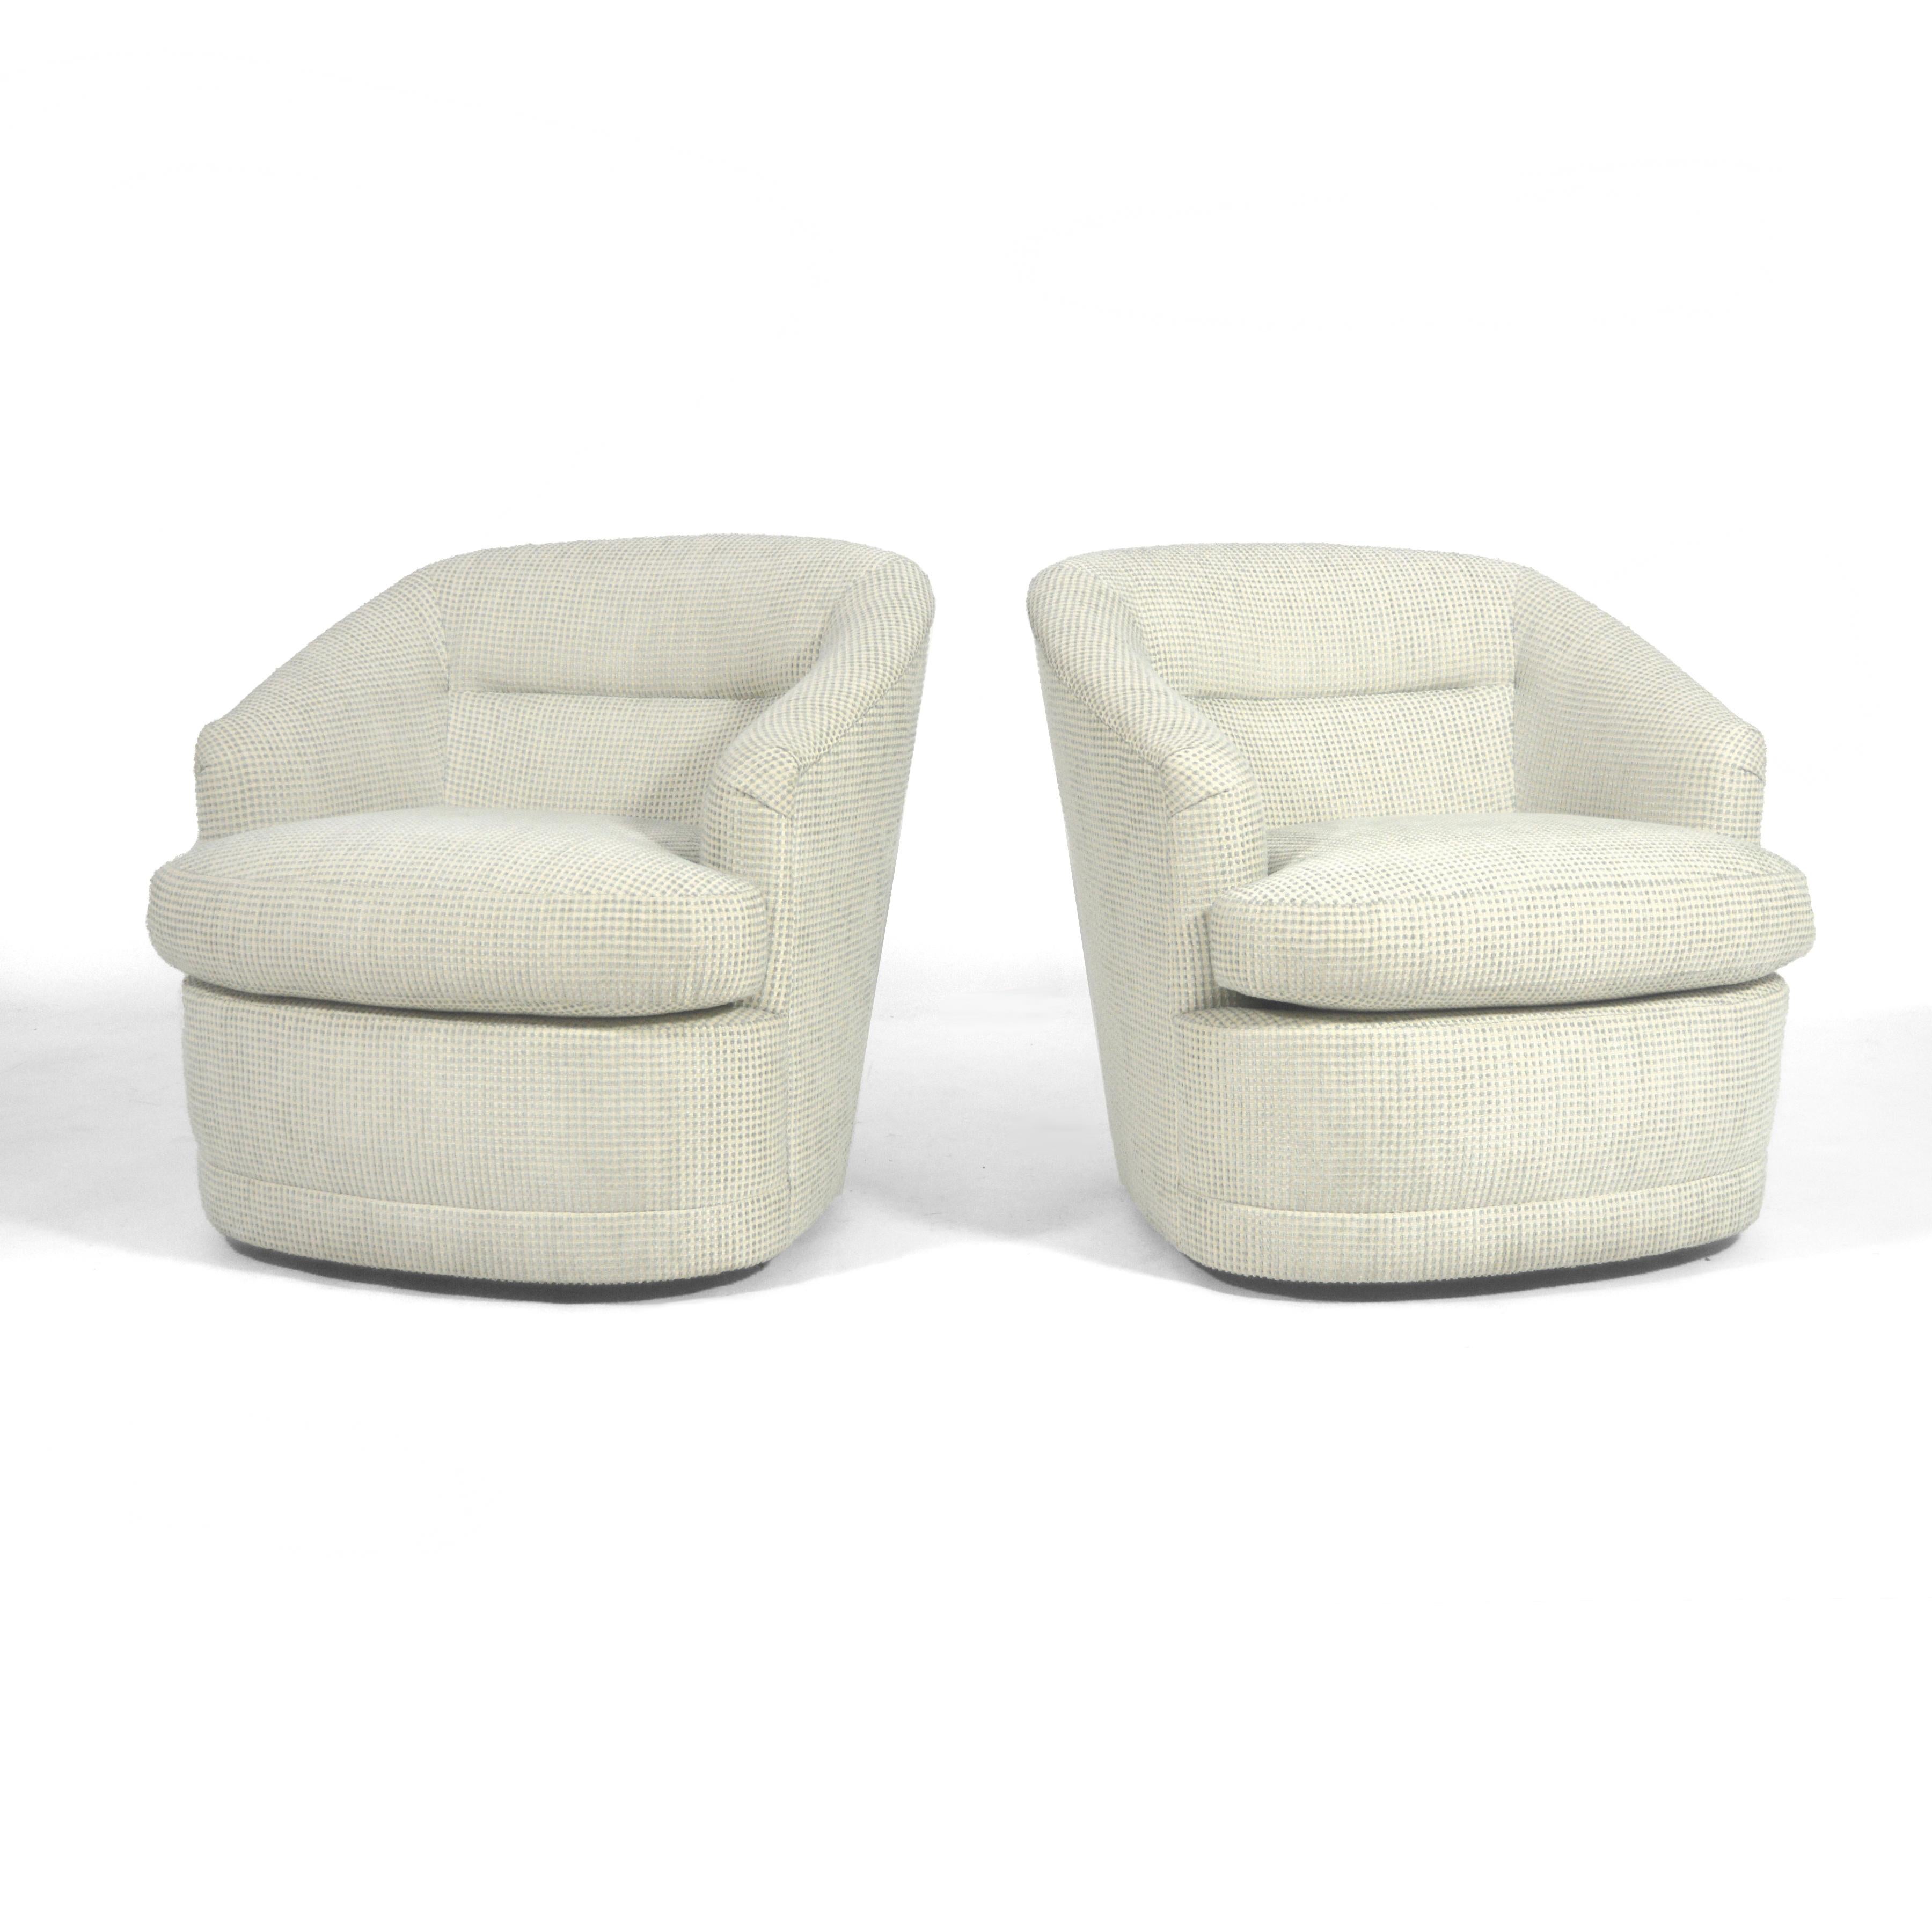 Late 20th Century Barrel Chairs in the Manner of Milo Baughman For Sale